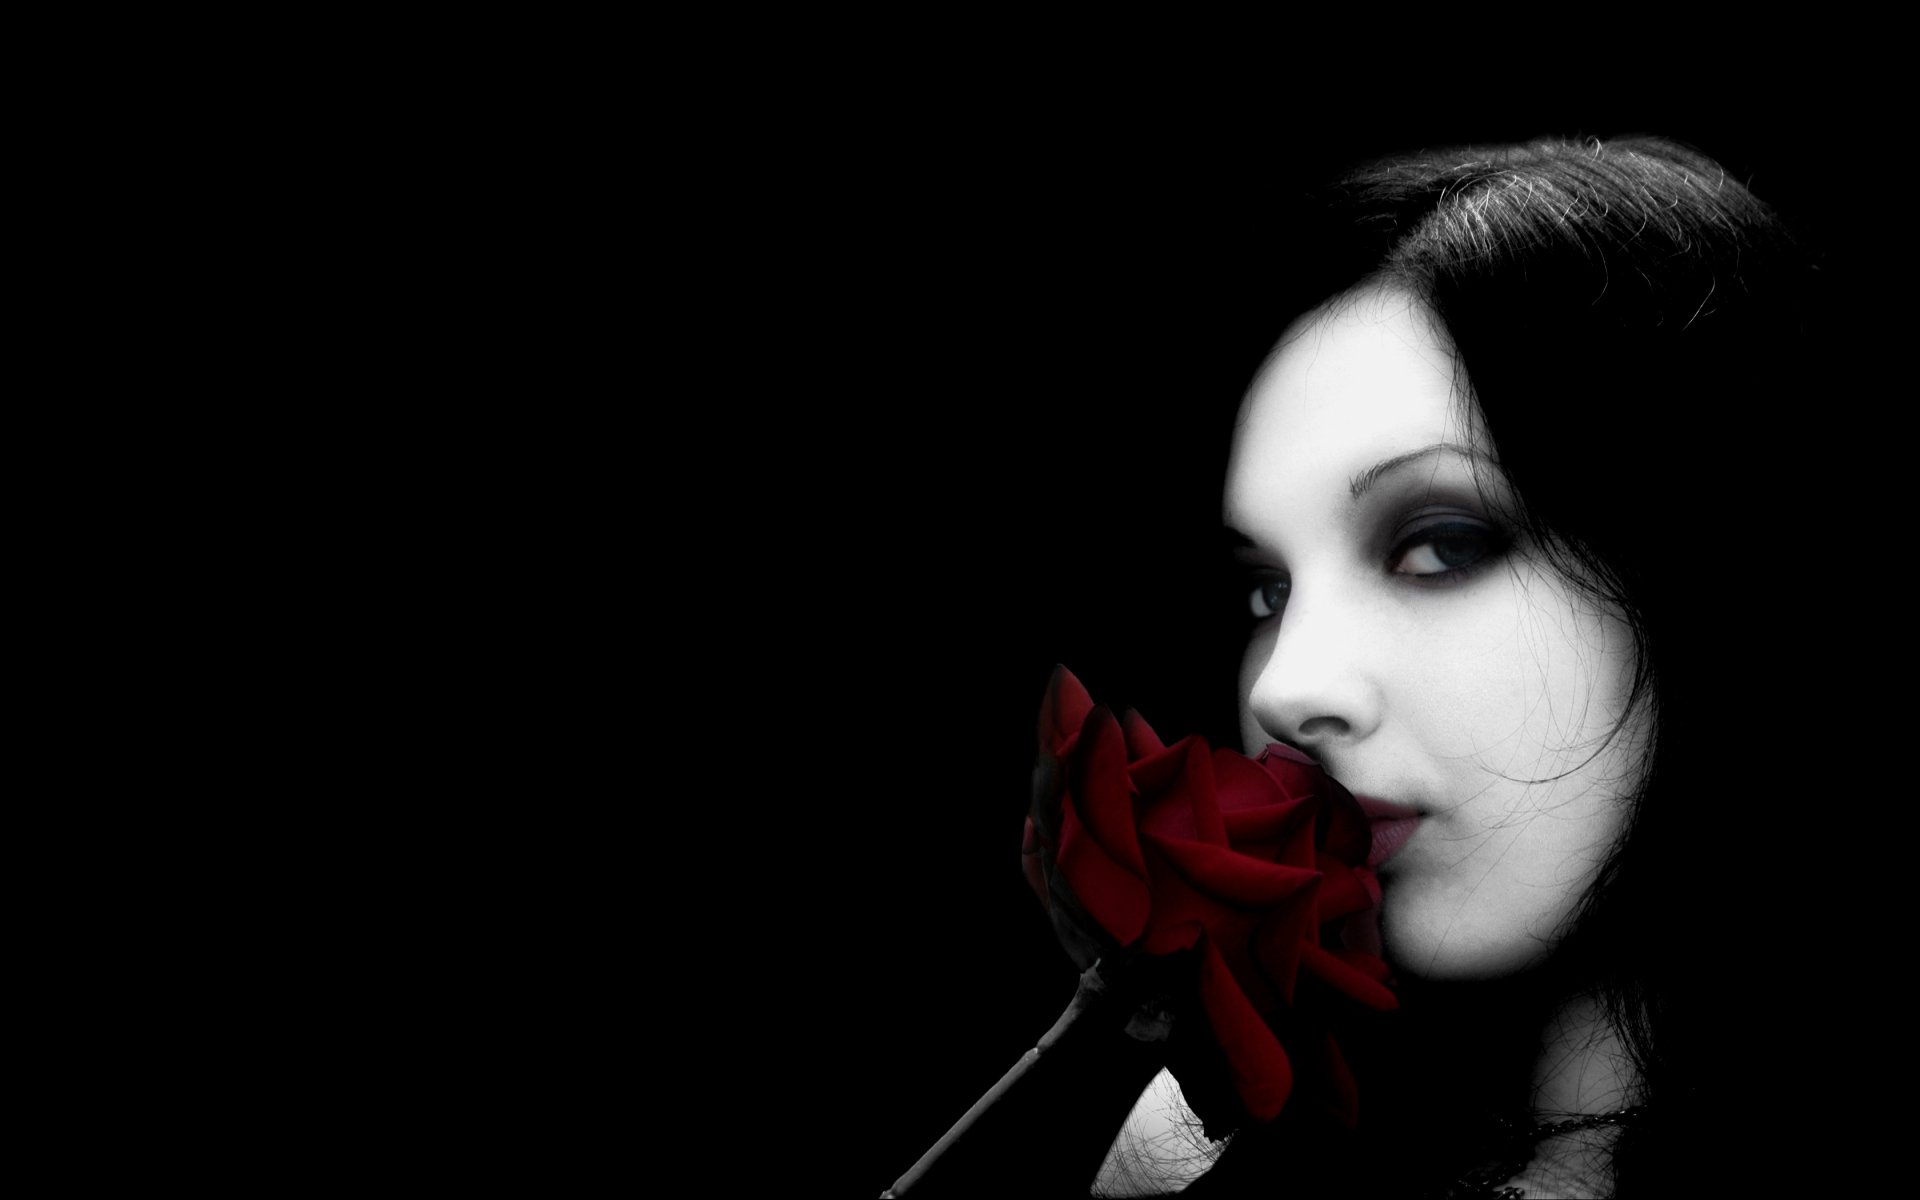 3360x2100 Gothic Woman Smelling a Rose Wallpaper Background Image. 